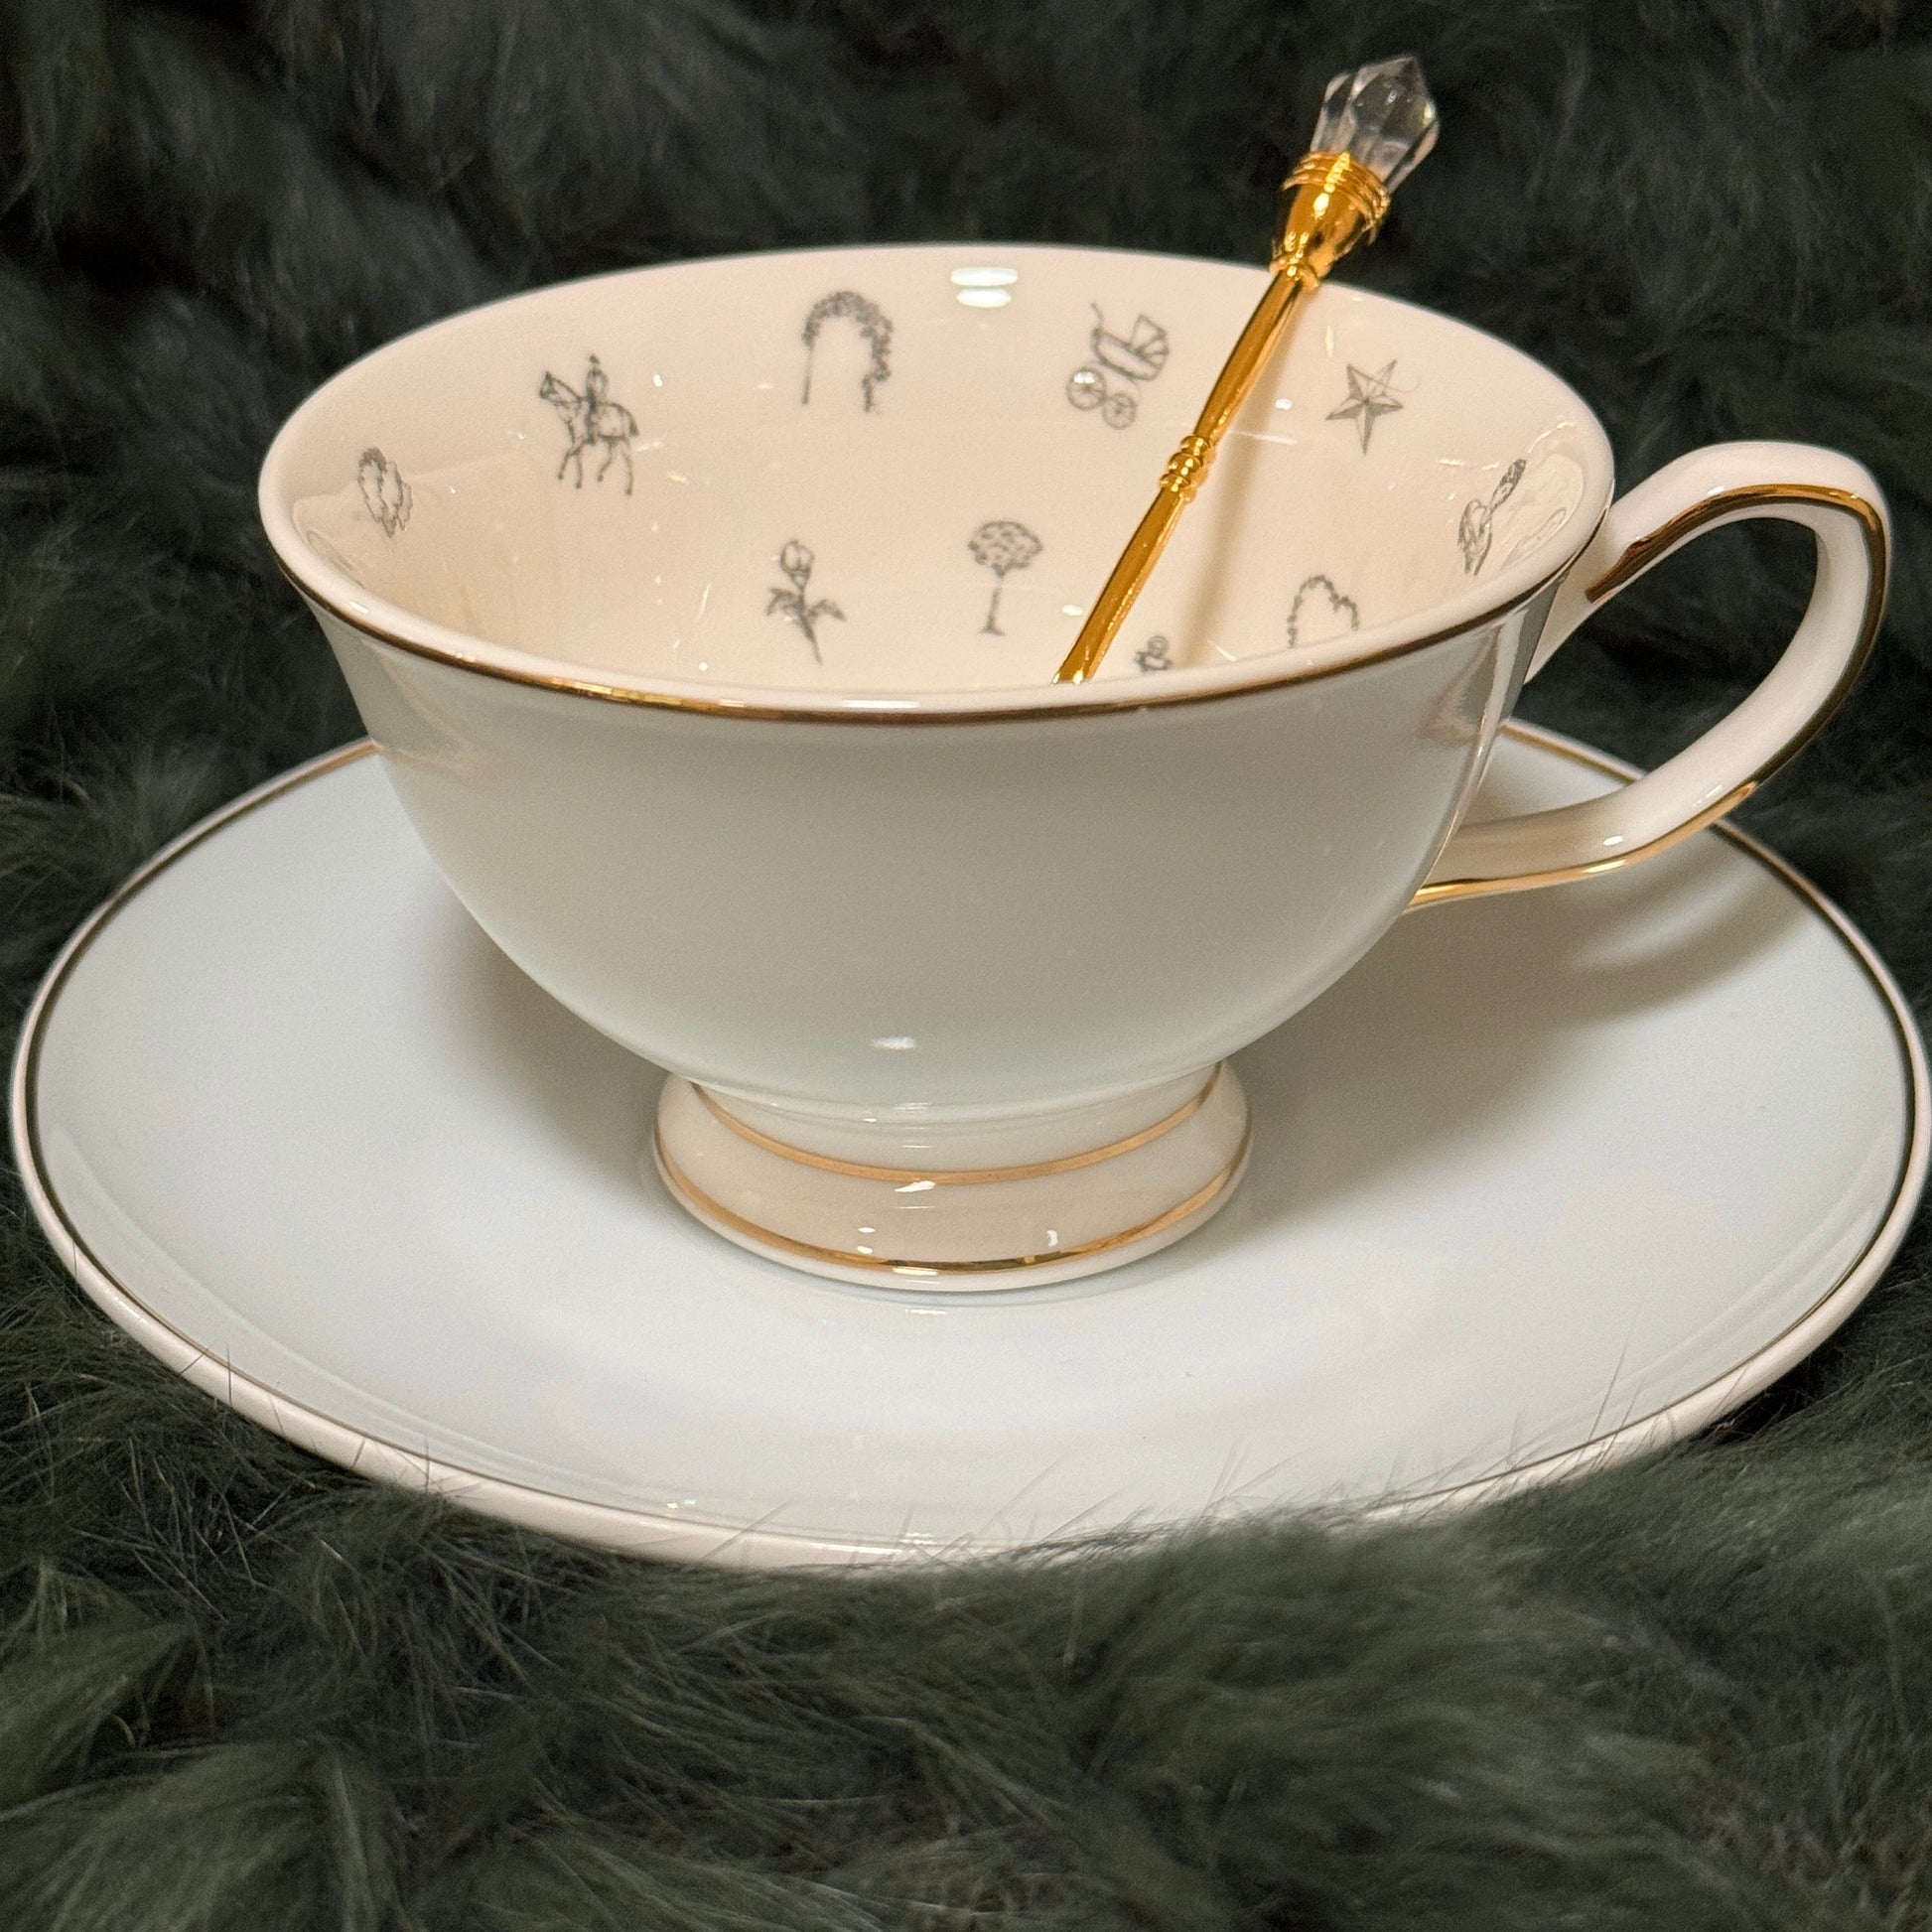 This is a pale blue teacup and saucer set. It is a lovely pale blue colour and has 32 tea leaf reading images permanently fired inside the teacup. Remove the guess work out of tea leaf reading. Perfect gift for Mom, friend or loved one.